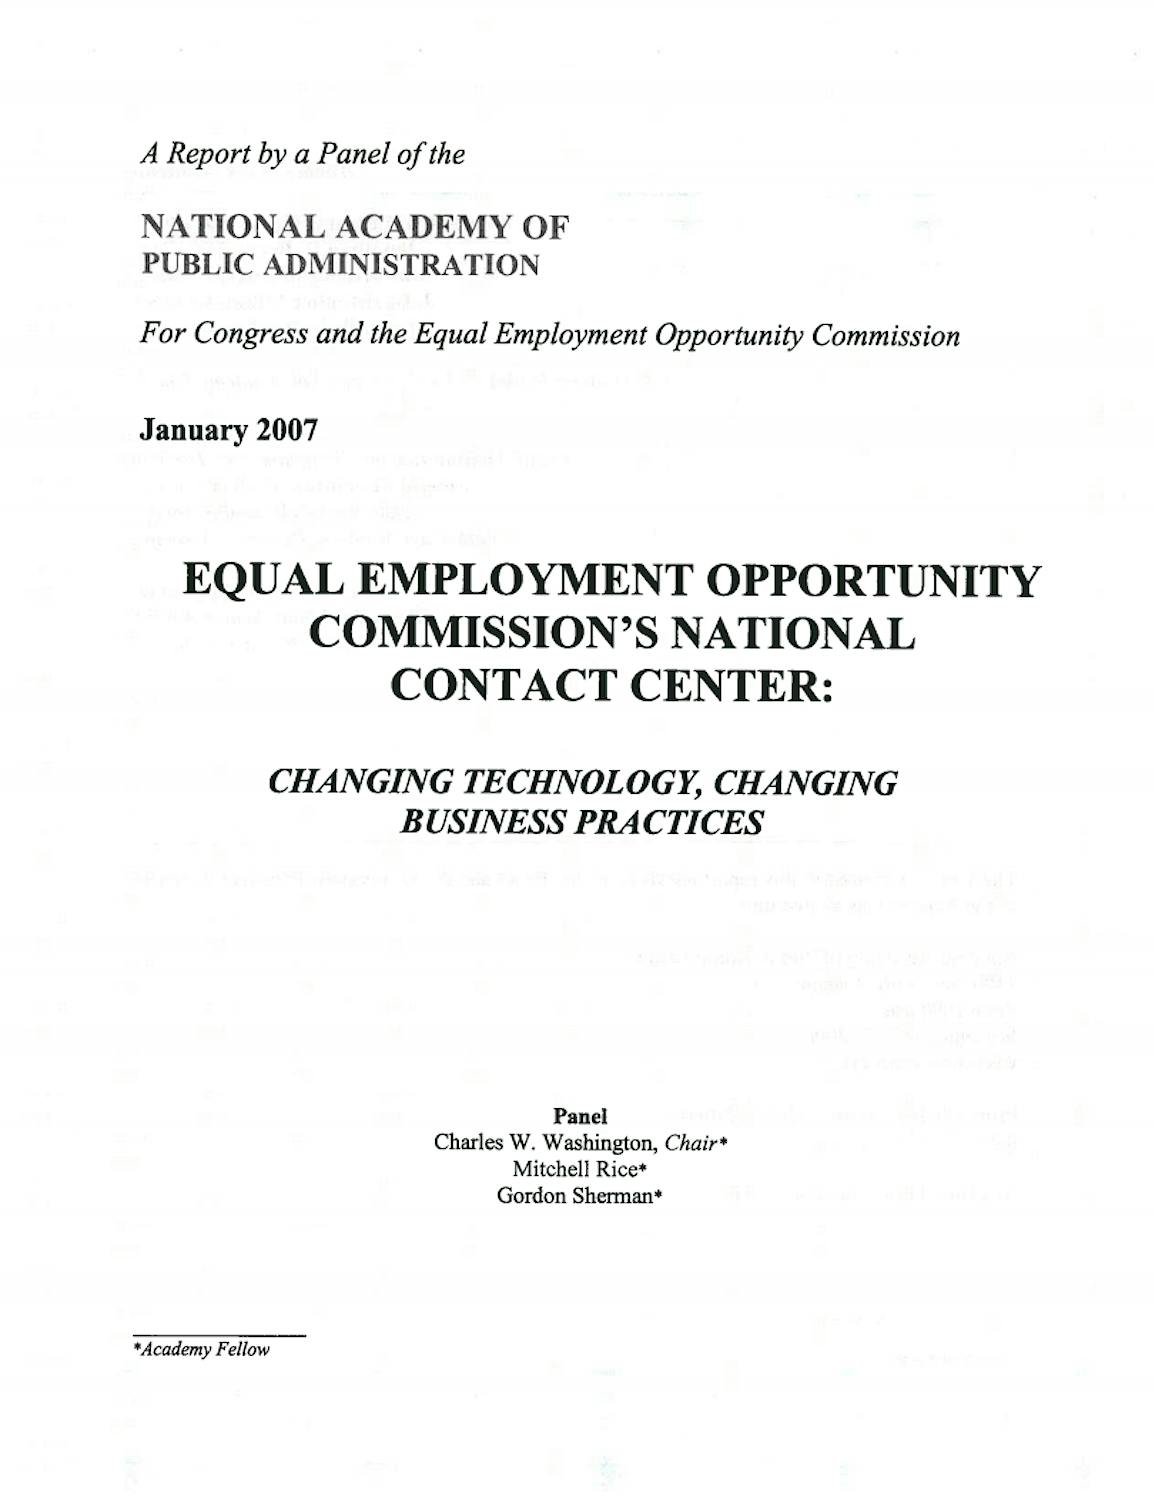 0701 EEOC National Contact Center